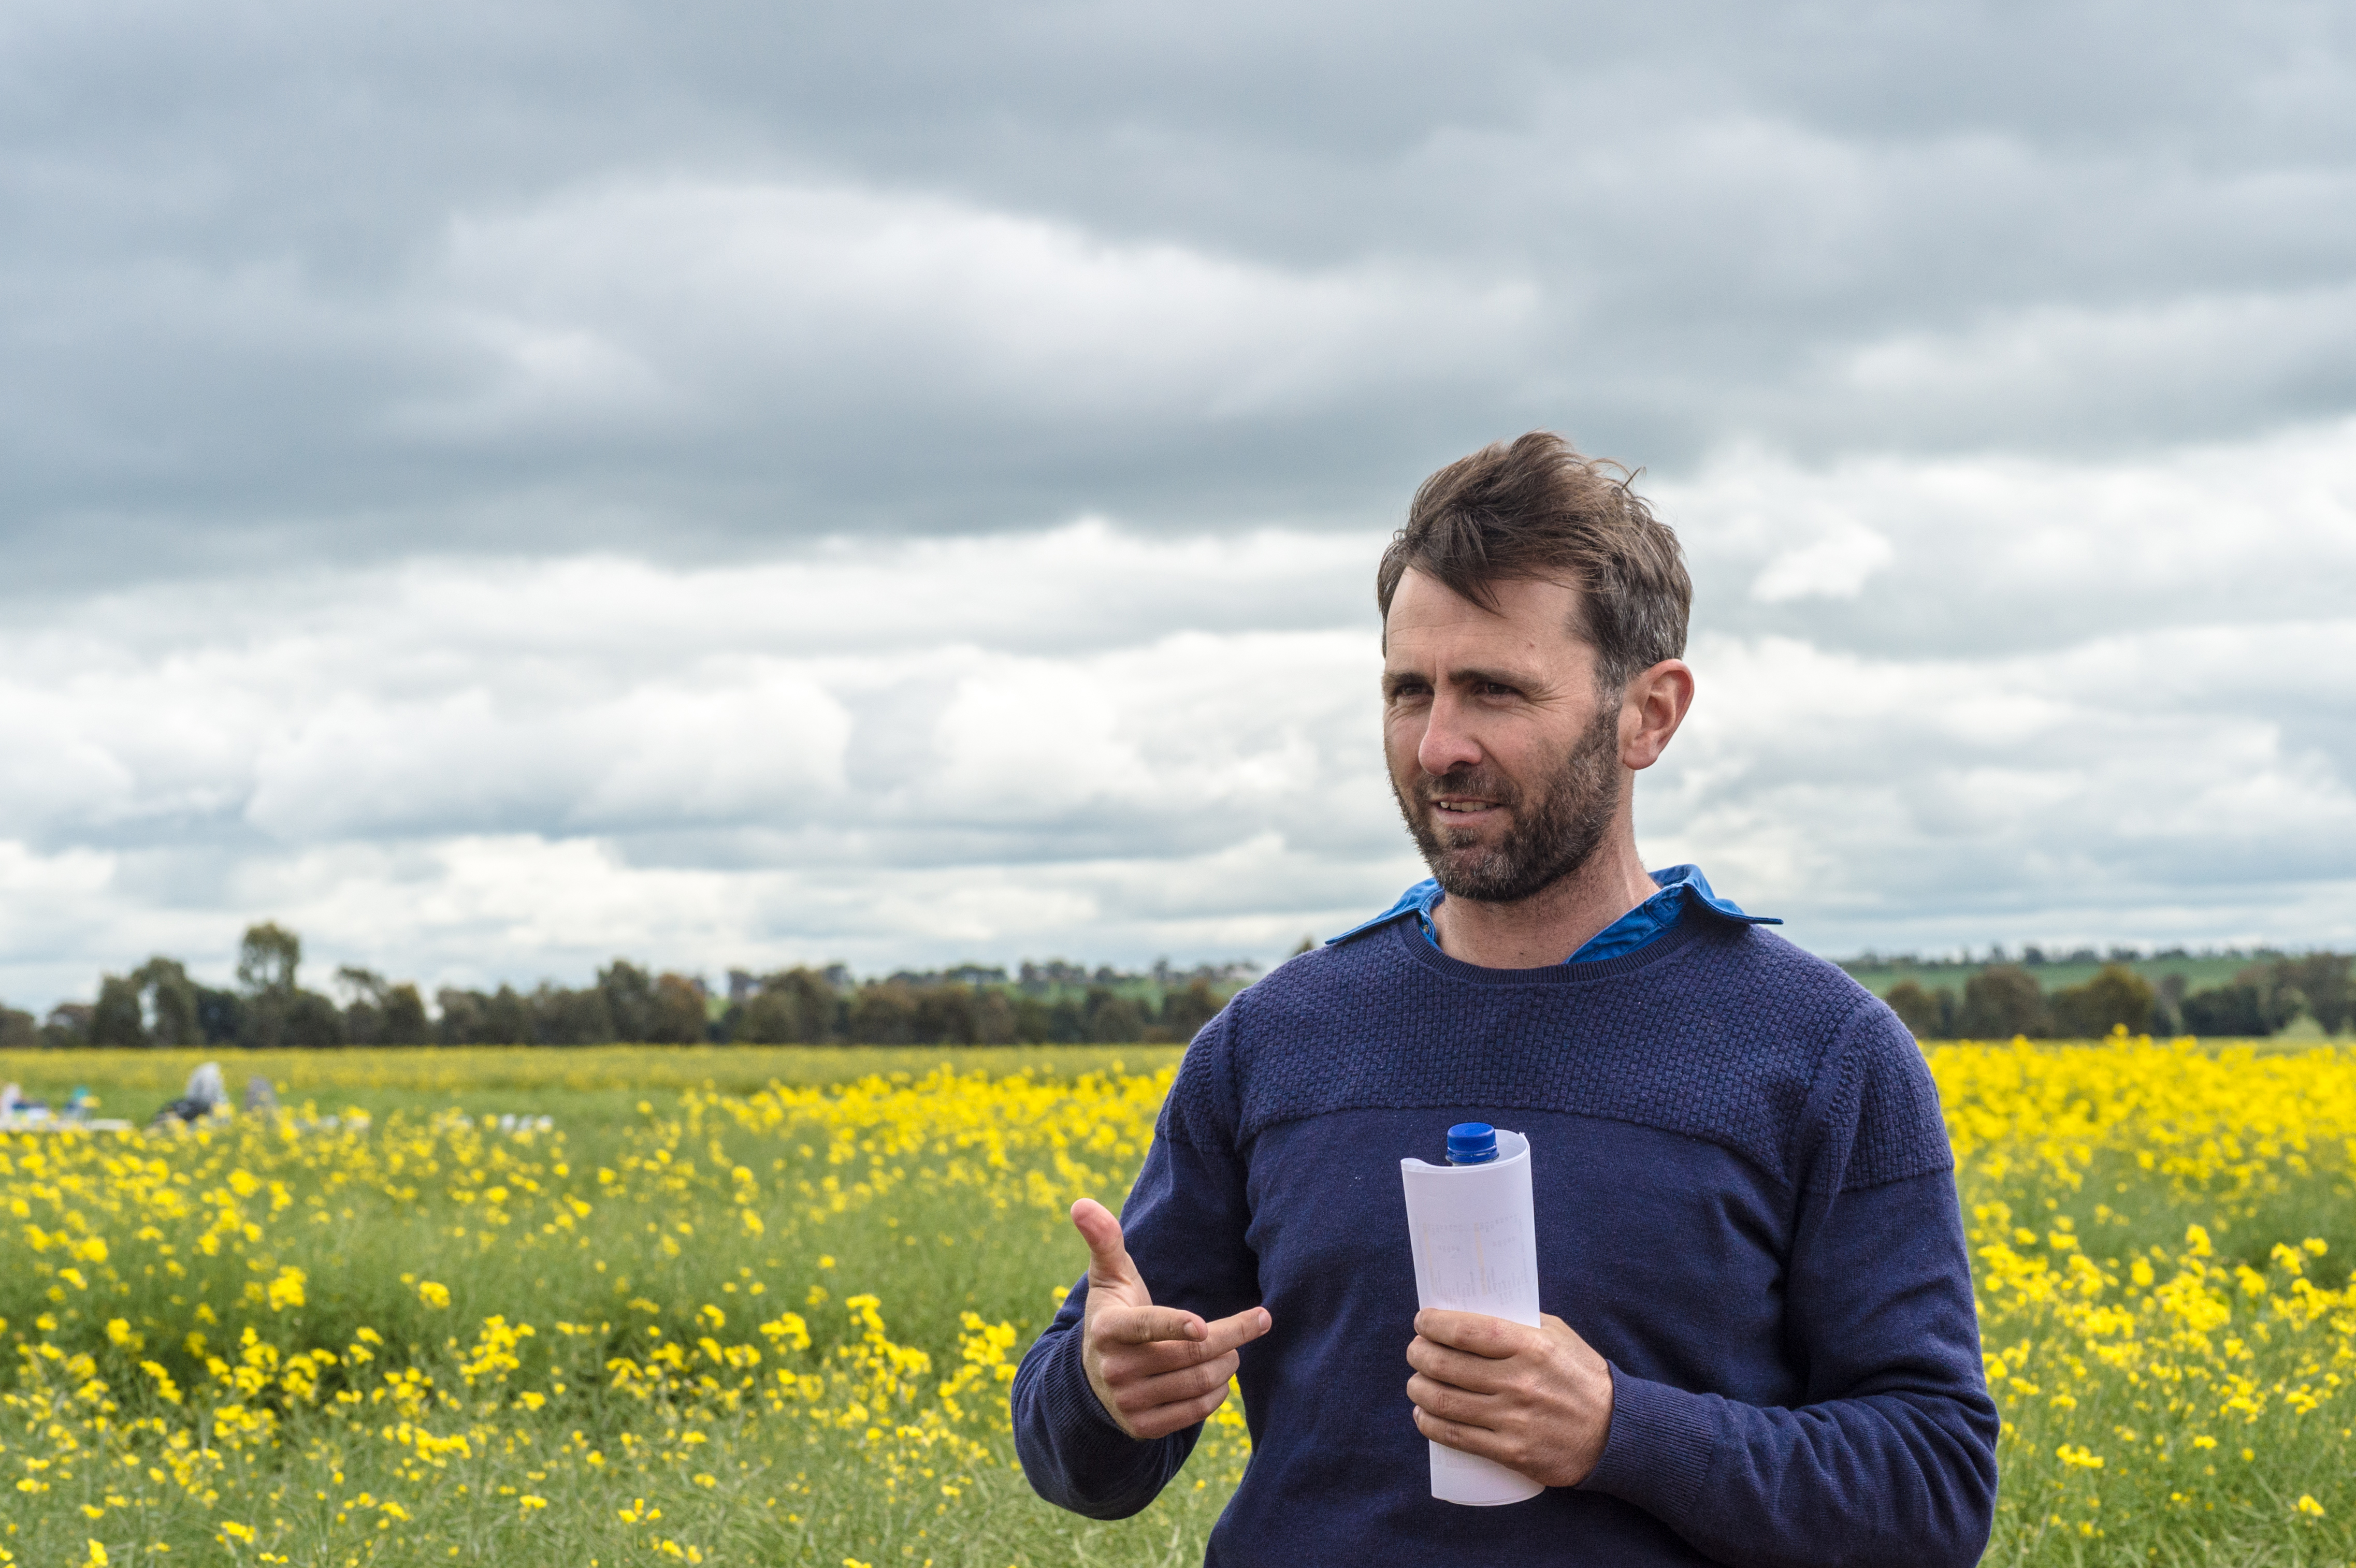 New South Wales Department of Primary Industries (NSW DPI) research and development agronomist Rohan Brill's work to optimise canola profitability provides useful practices based on location, sowing dates and available nitrogen.